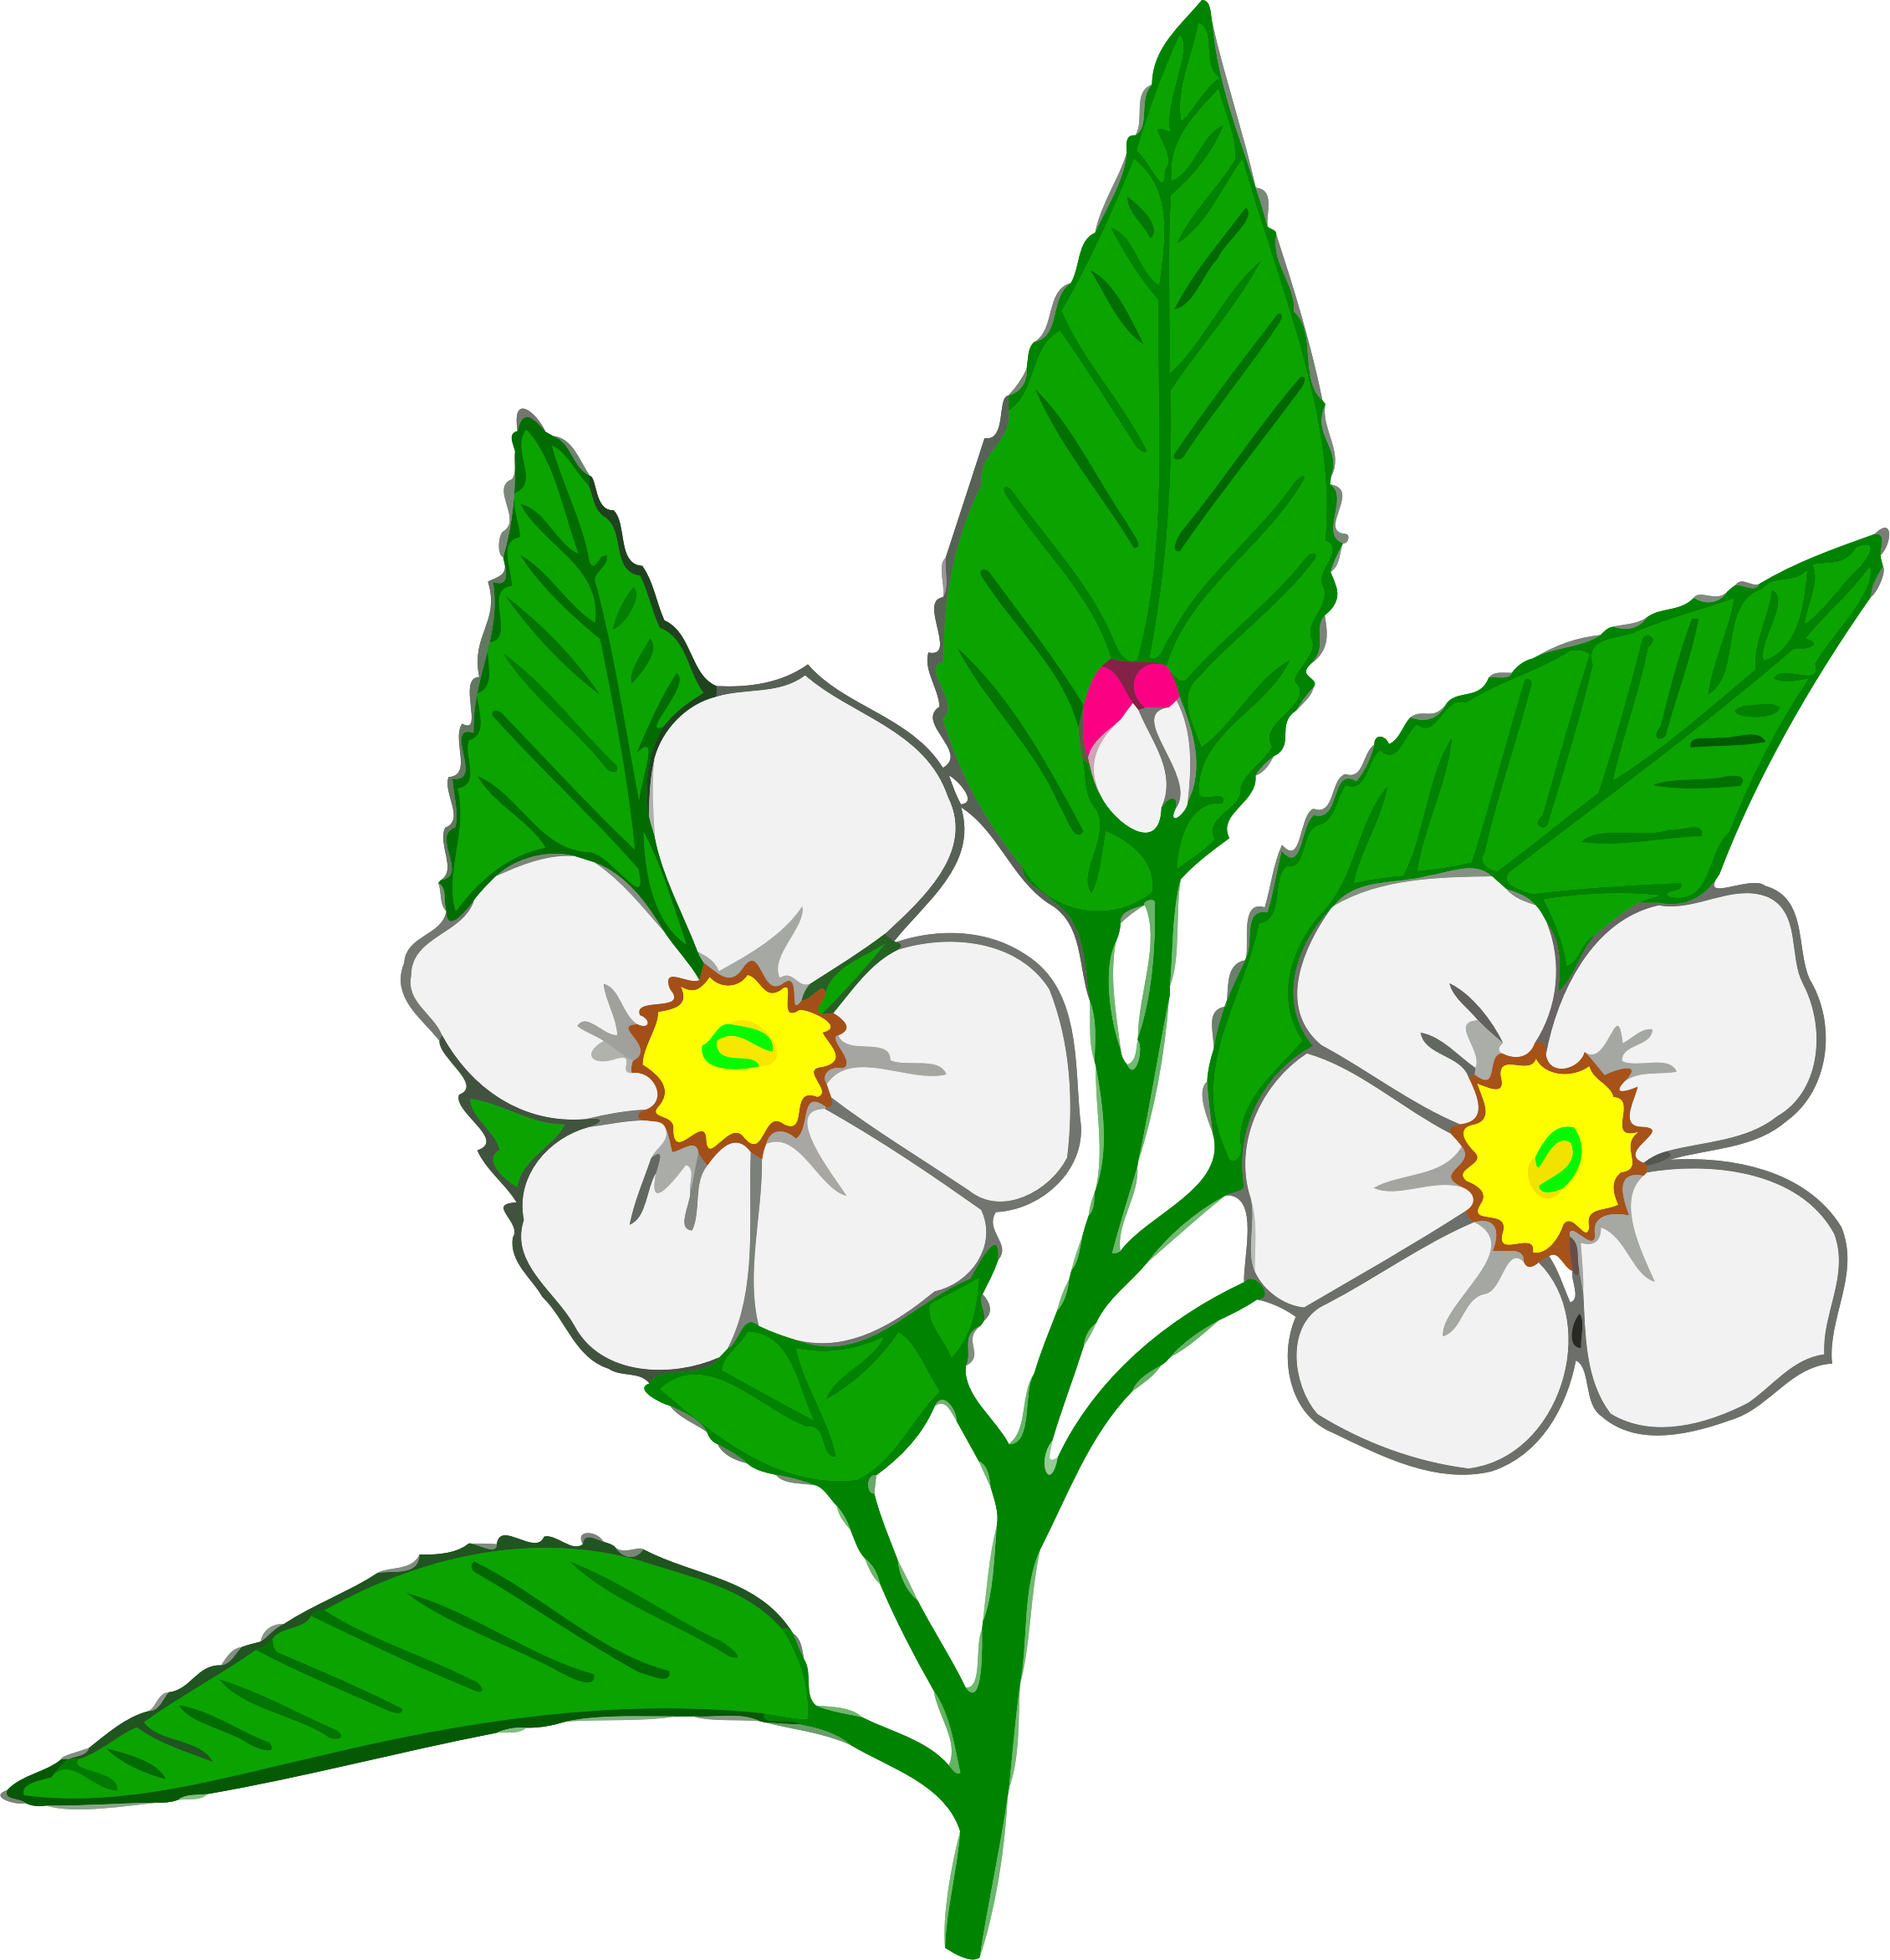 Flowers clipart apple blossom. At getdrawings com free